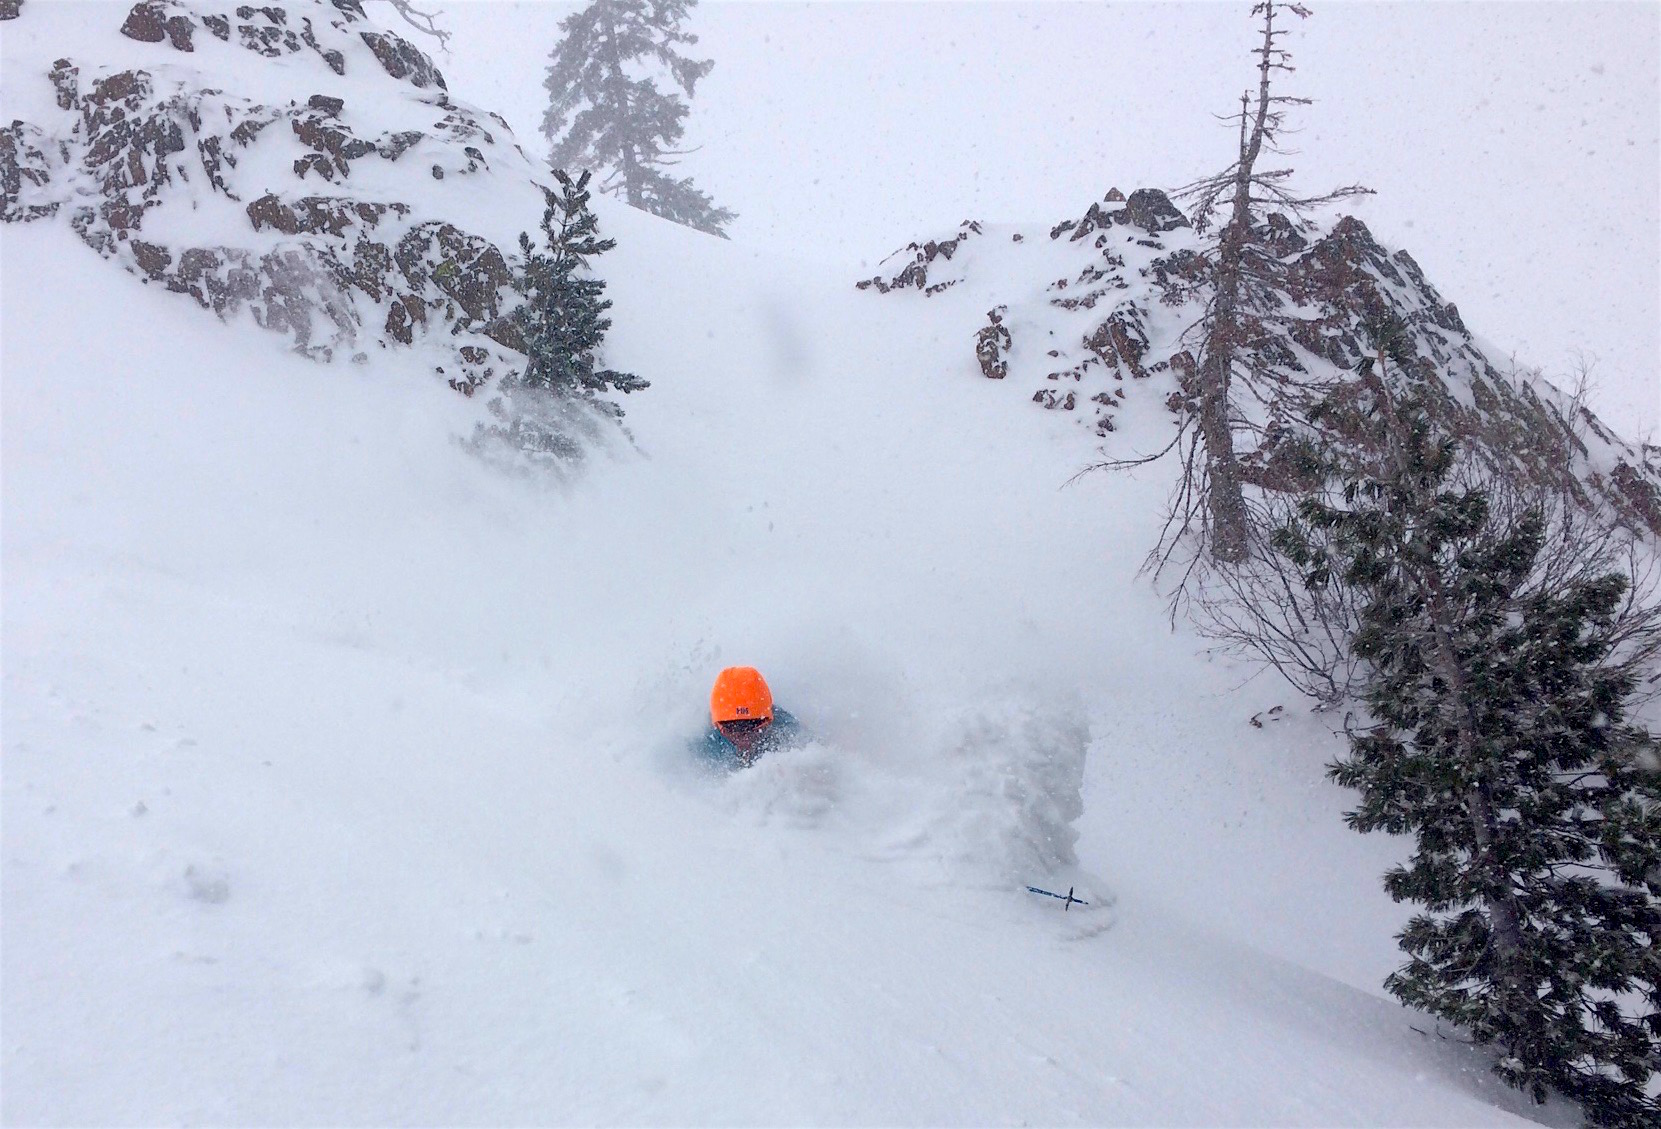 Miles in the deep today at Alpine. photo: alan ashbaugh